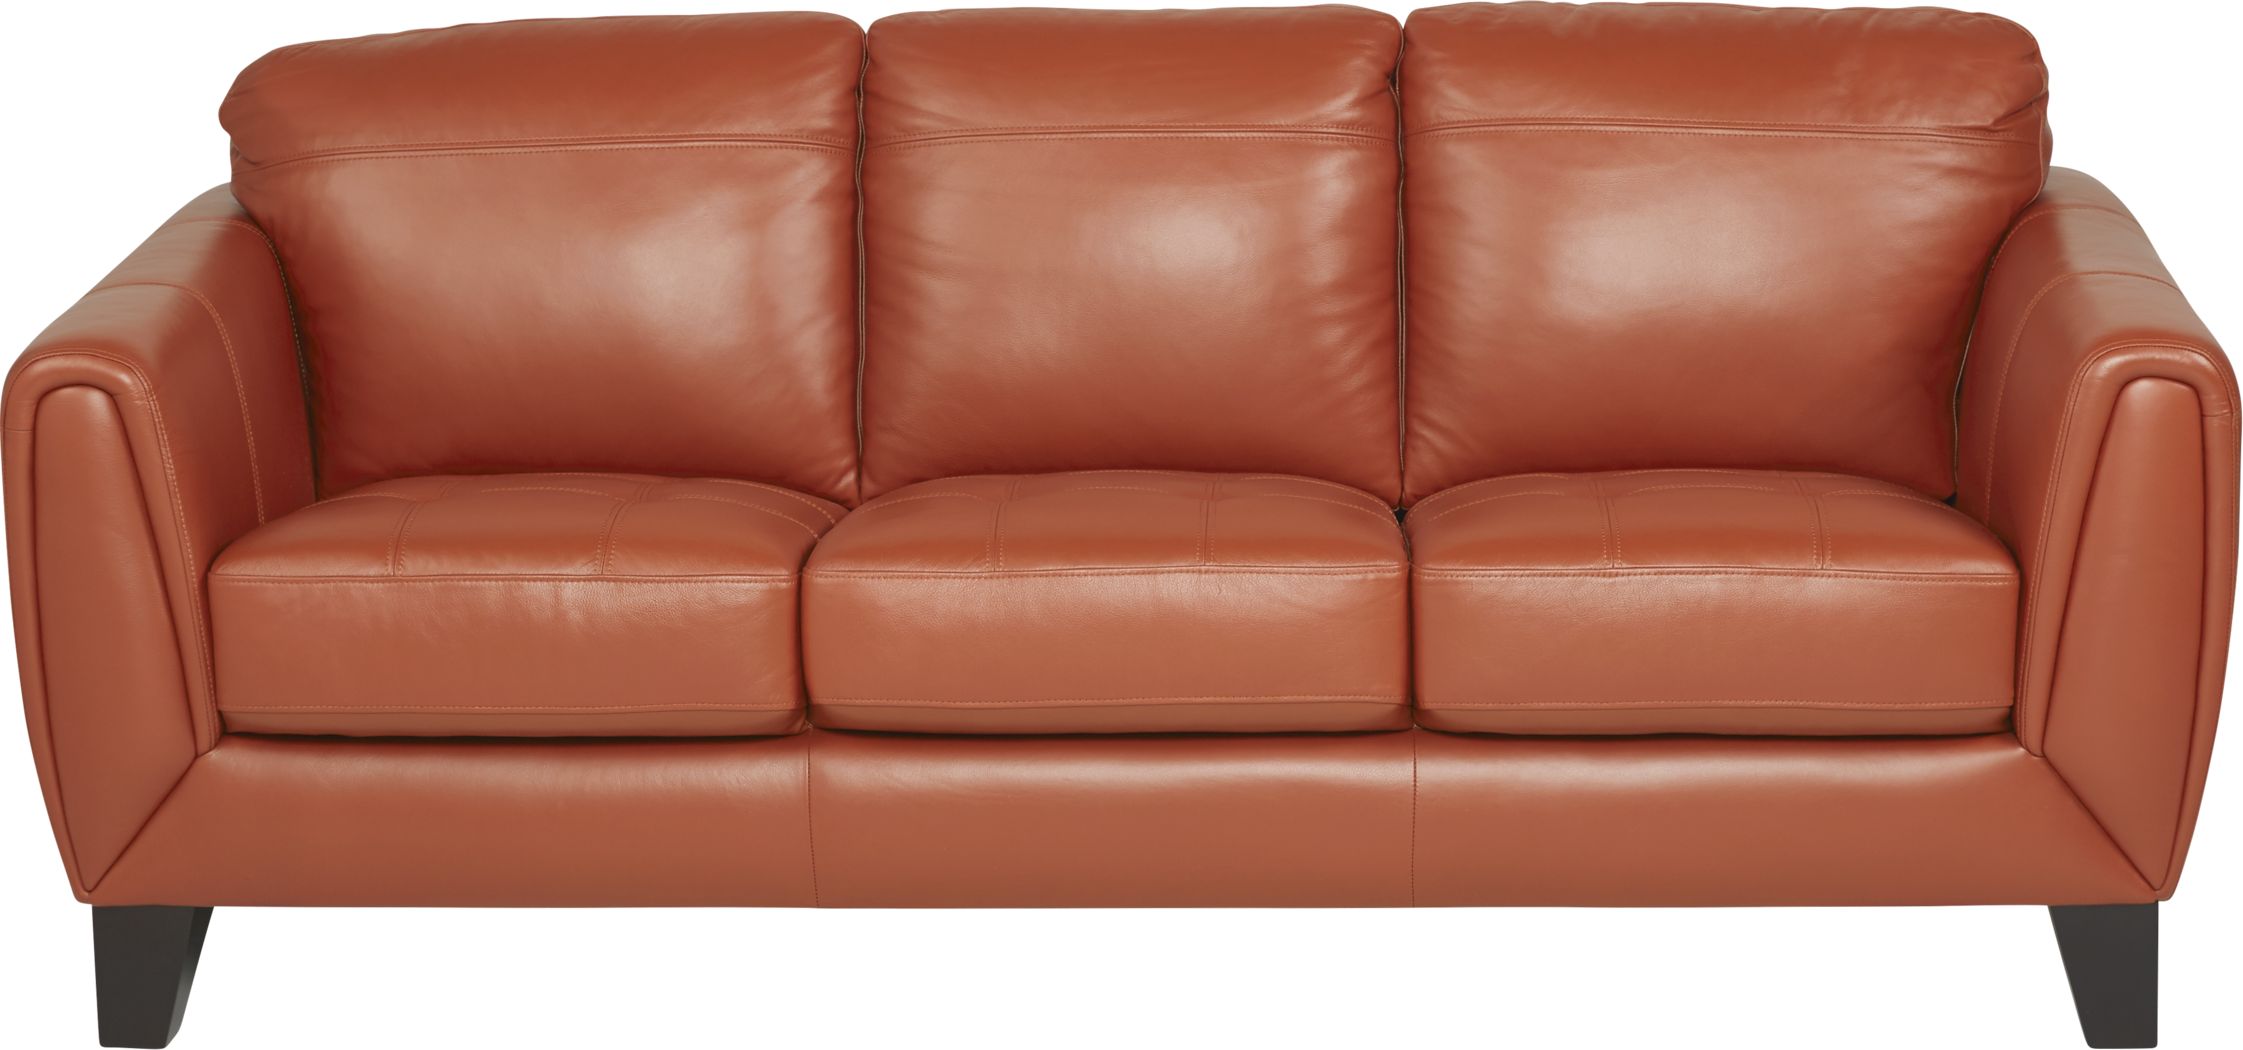 Leather Living Room Furniture, Leather Couches Orlando Fl